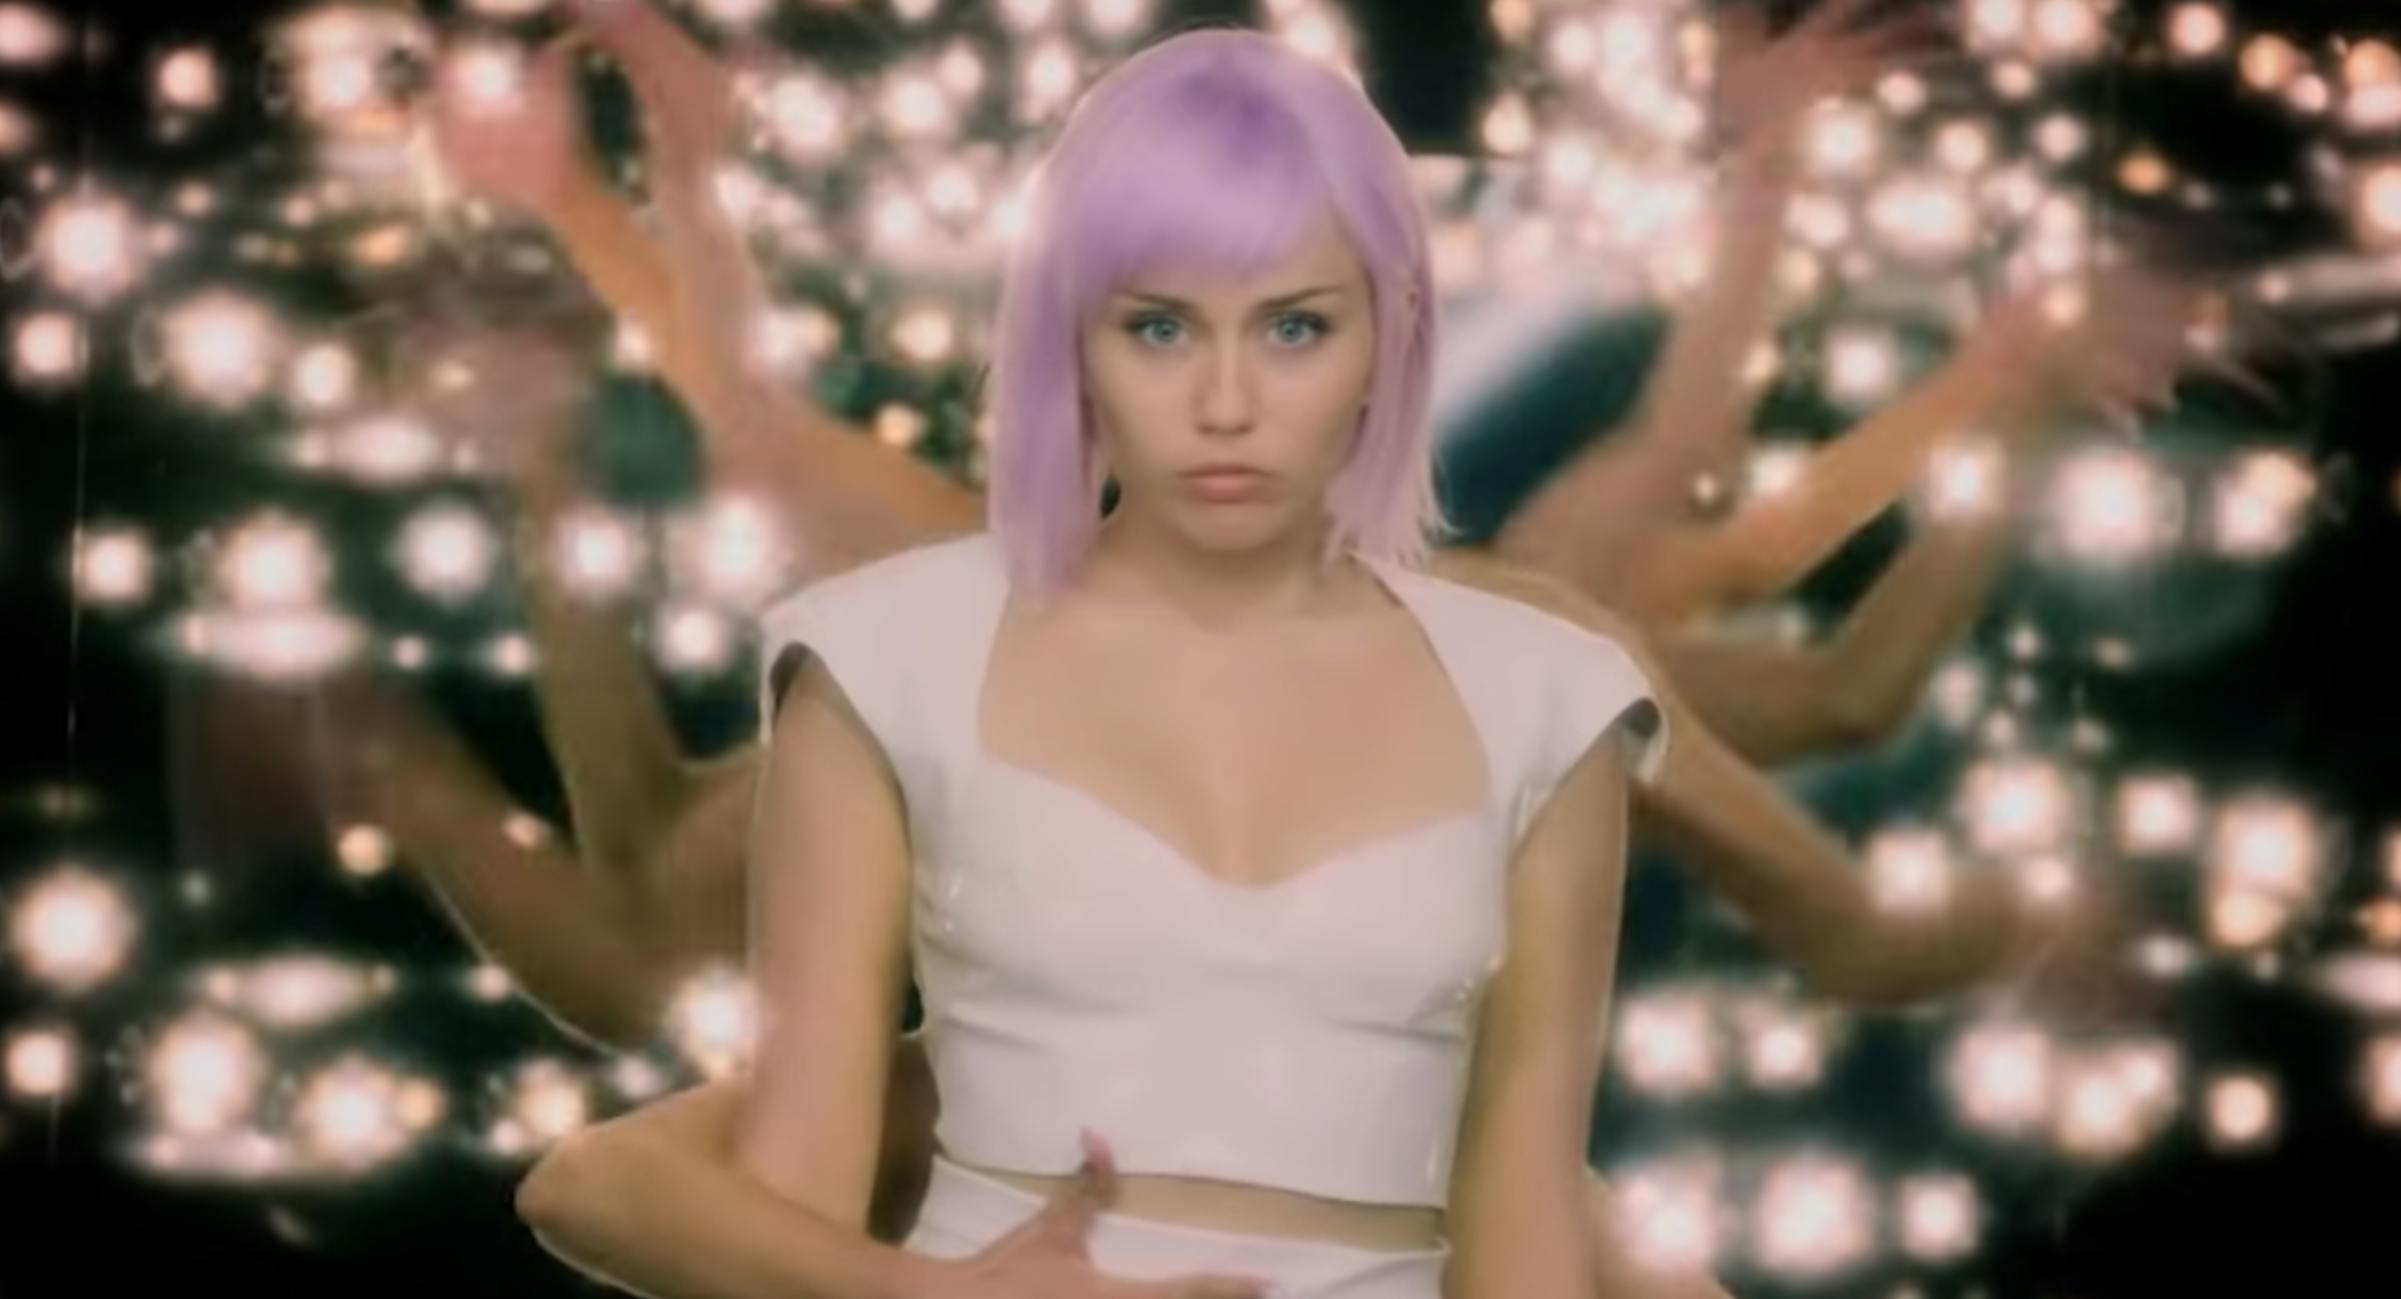 Miley Cyrus Covers Nine Inch Nails In Unsettling New Black Mirror Episode